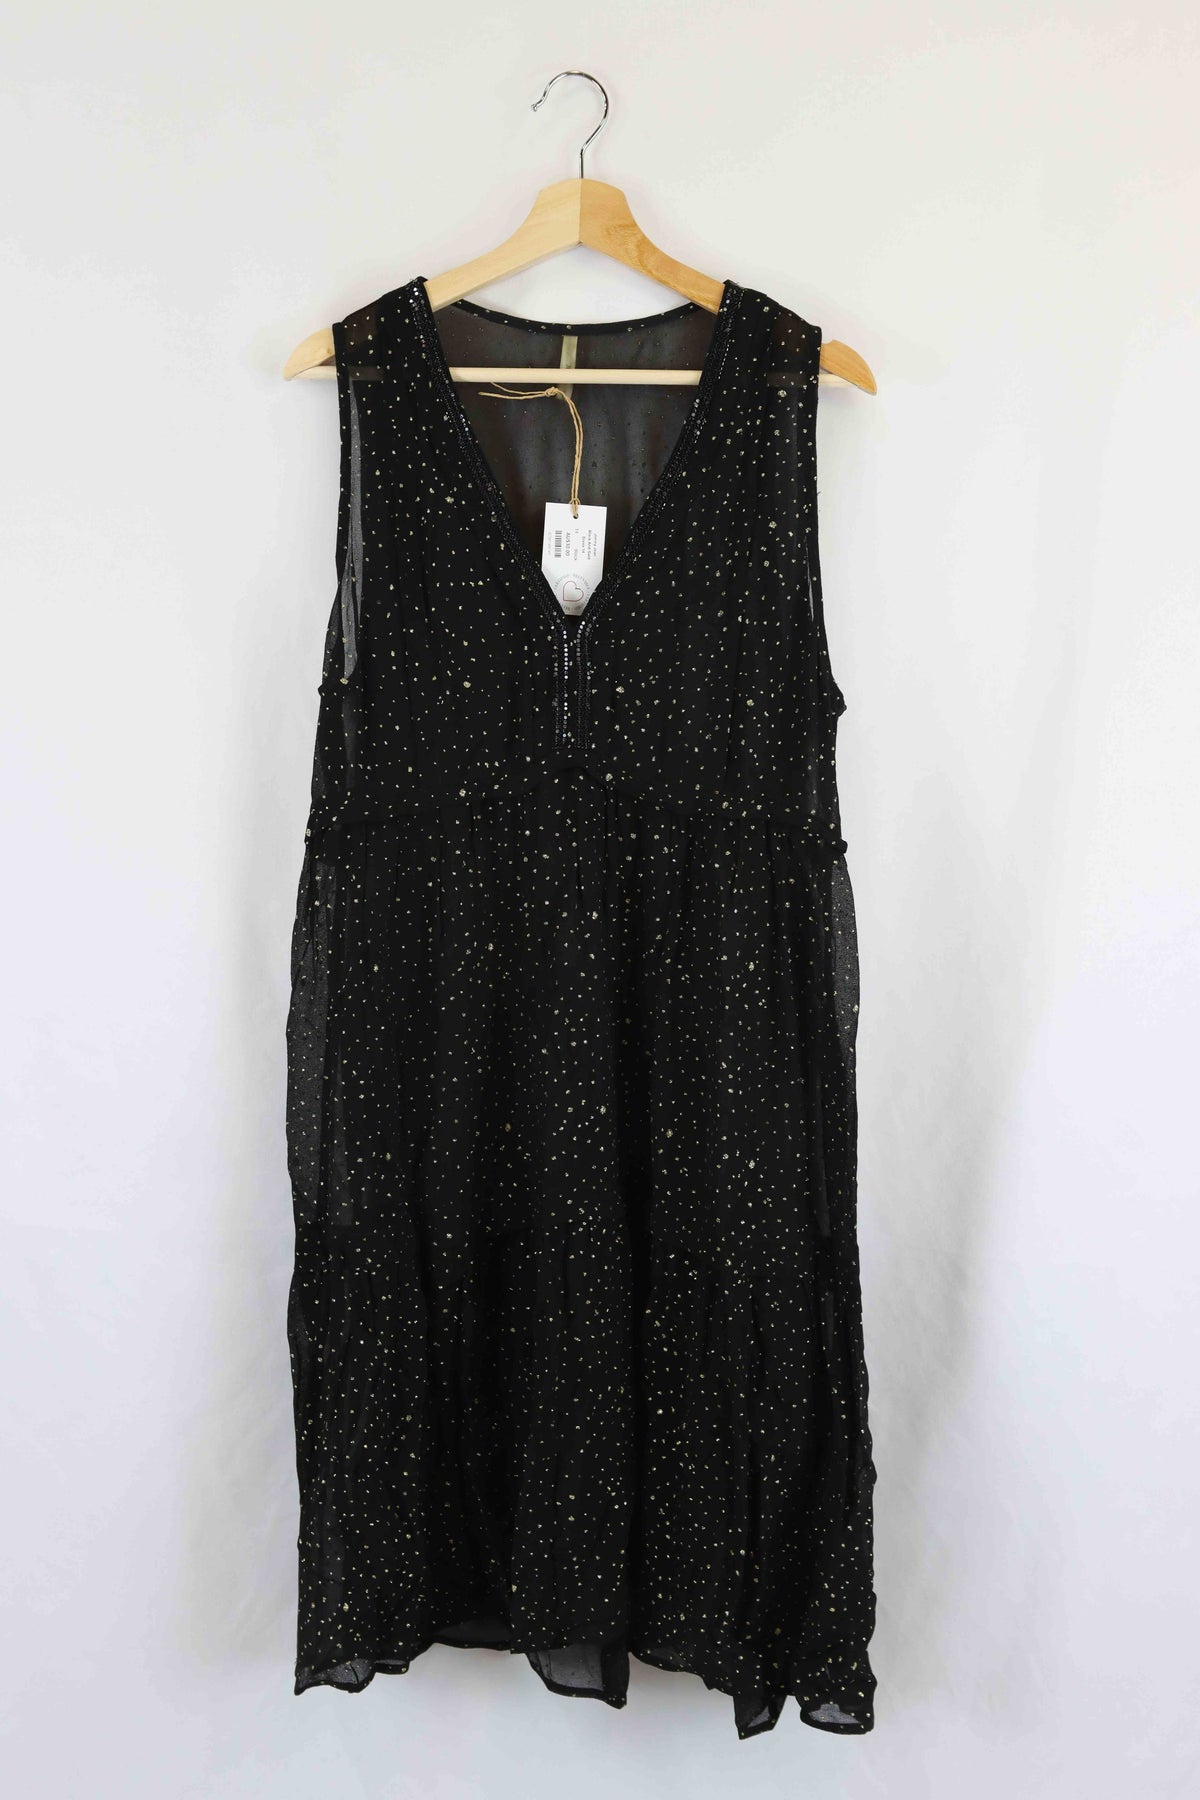 Jimmy Jean Black And Gold Dress 14